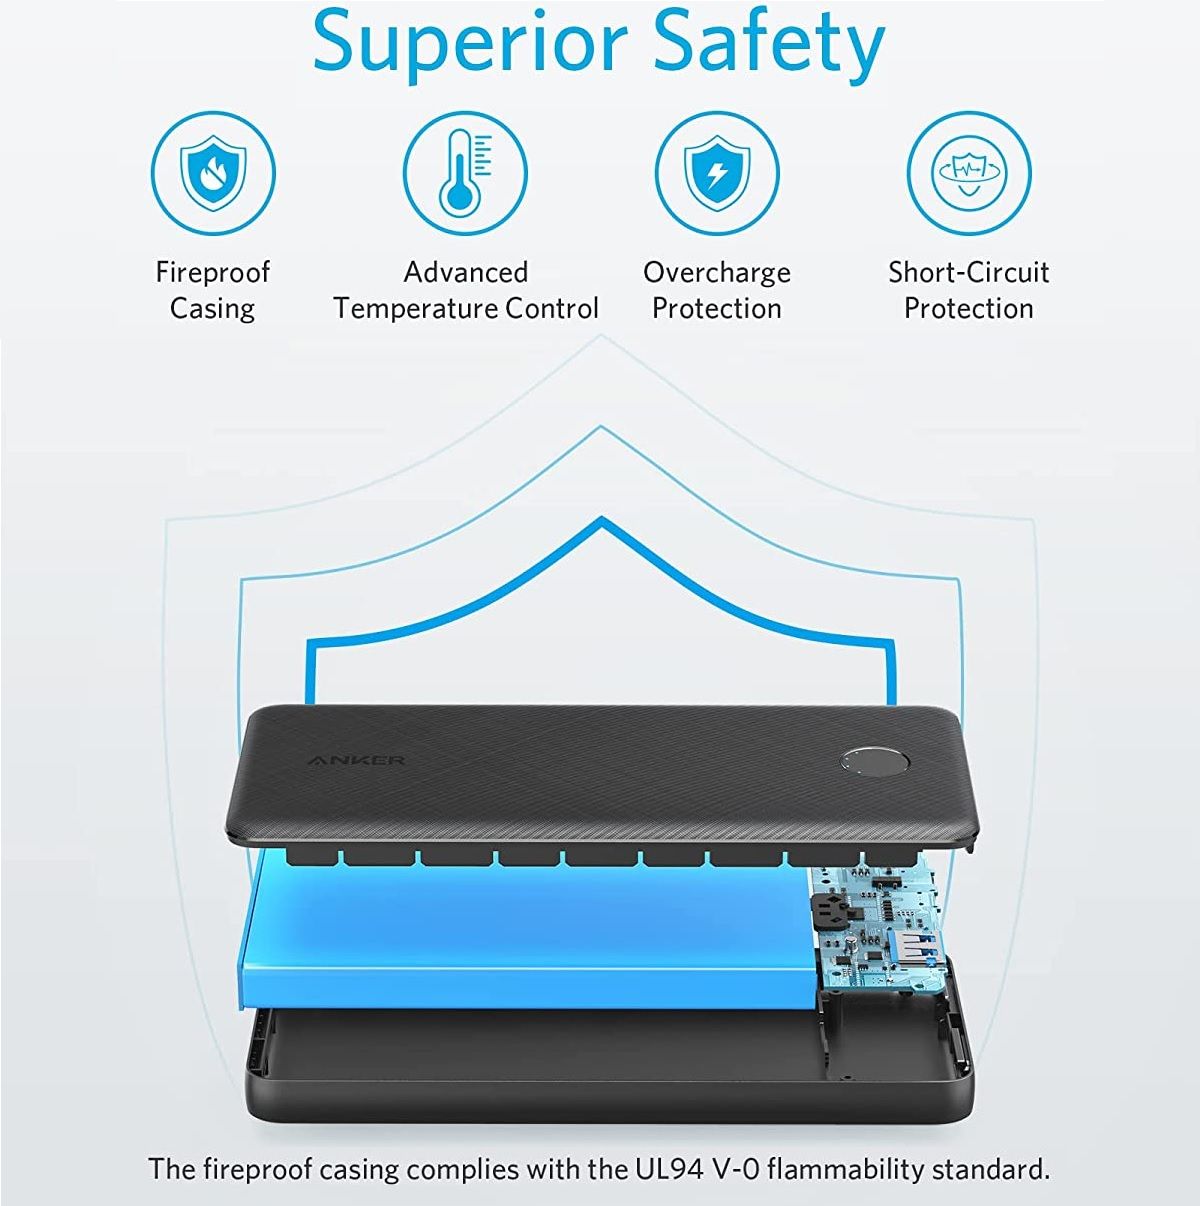 the anker 523 power bank featuring overcharge and short-circuit protection